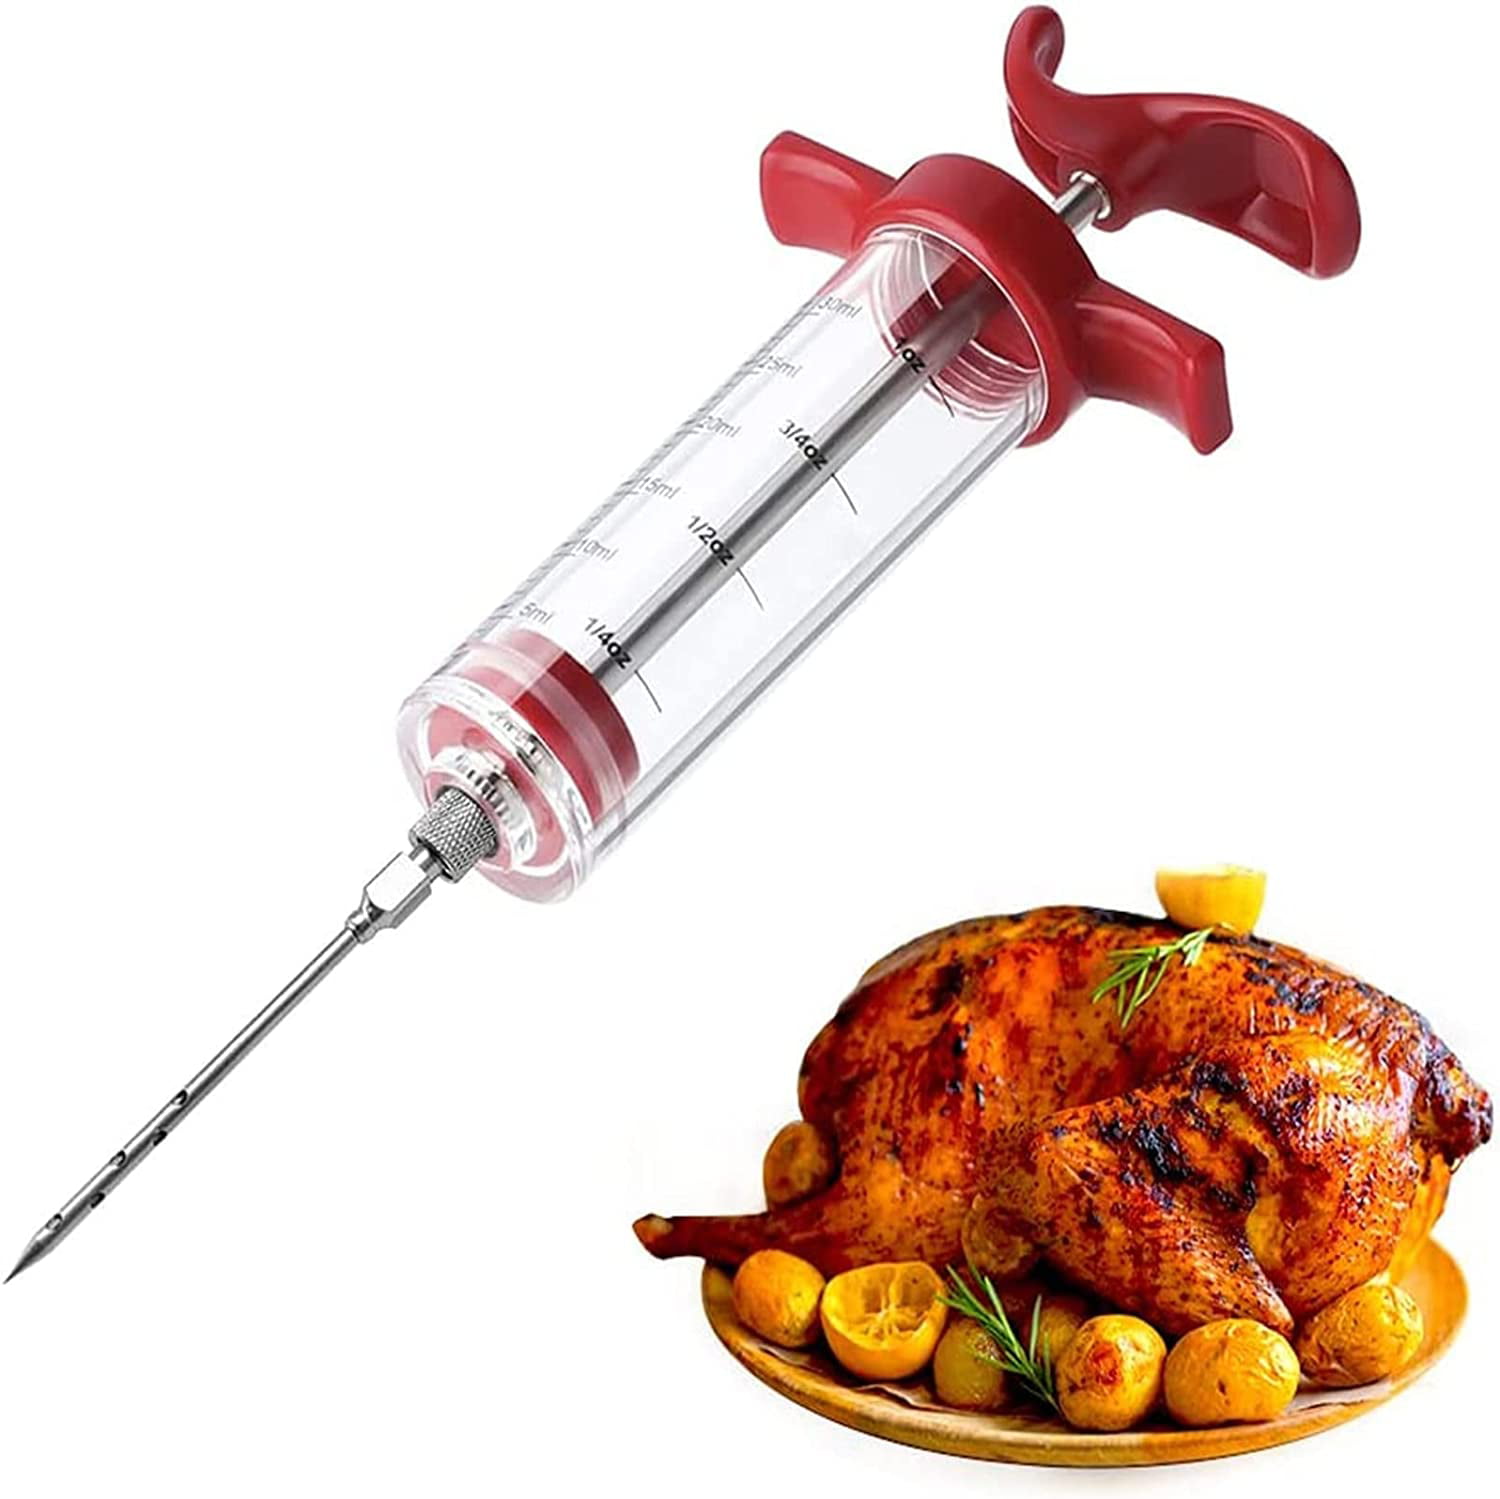 Tri-Sworker Meat Injector Syringe for Smoking with 4 Marinade Flavor Food  Injector Needles, Ideal to Injector Marinades for Meats, Turkey, Brisket